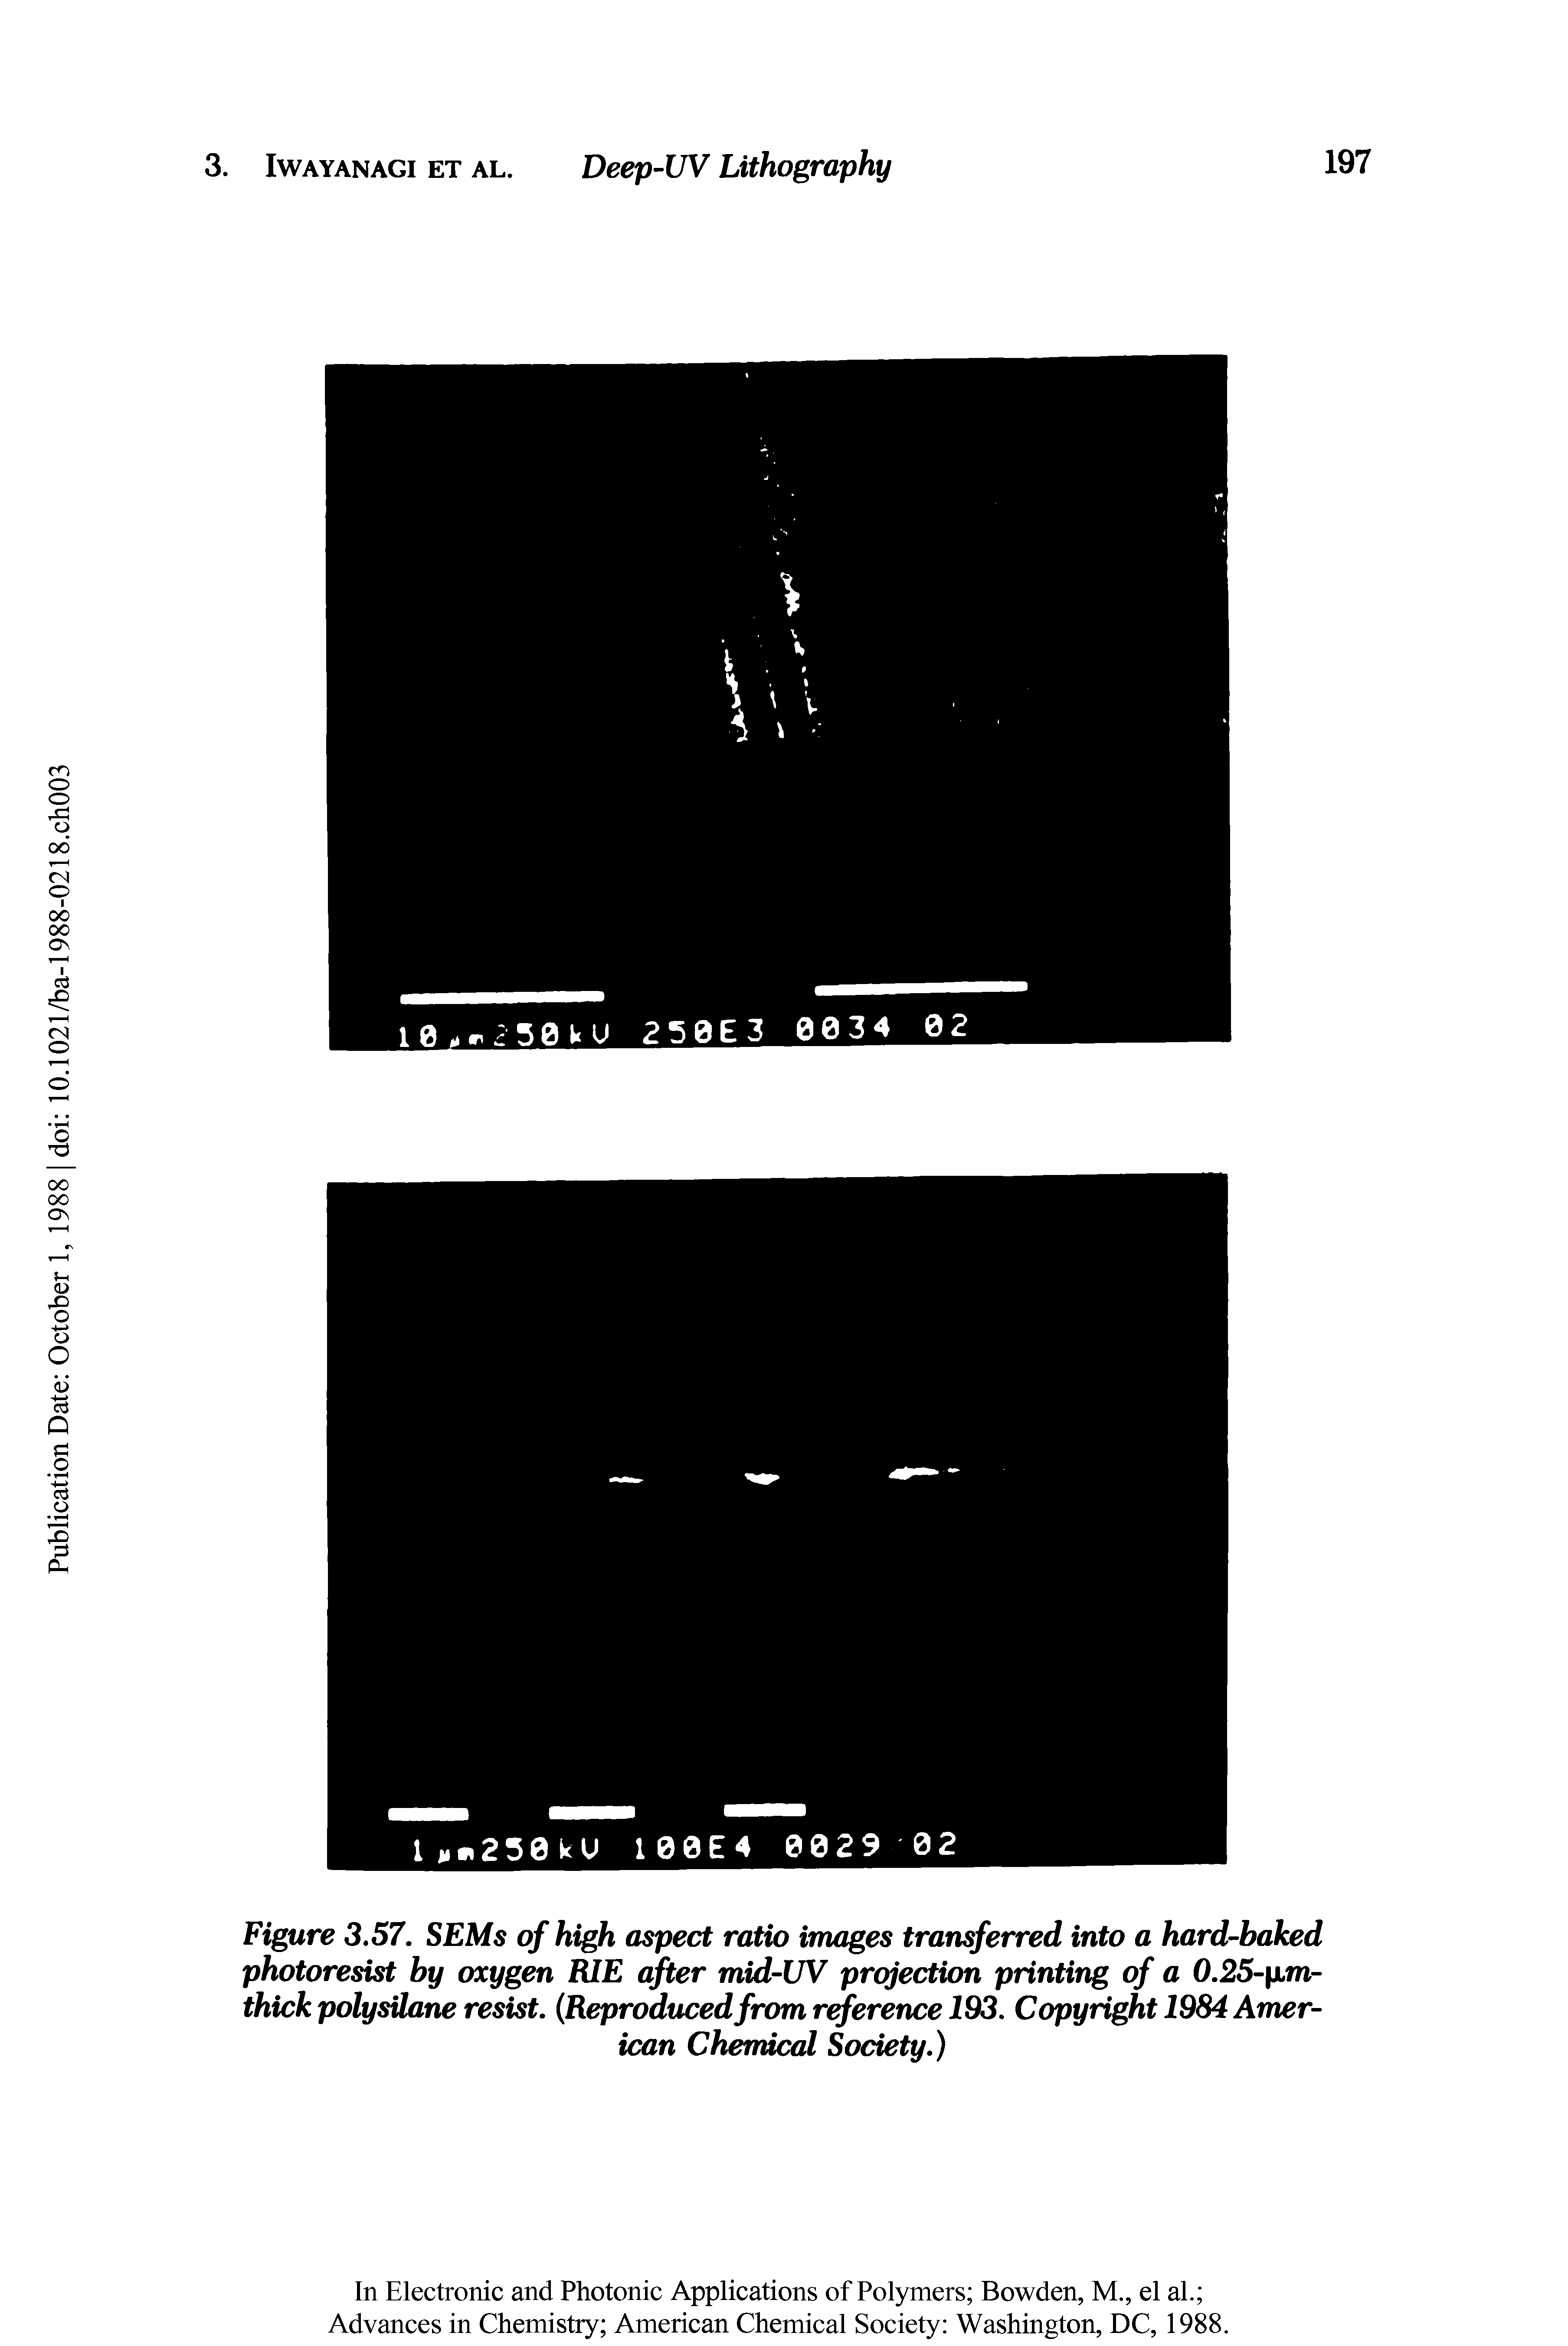 Figure 3,57. SEMs of high aspect ratio images transferred into a hard-baked photoresist by oxygen RIE after mid-UV projection printing of a 0.25-ixm-thick poly silane resist. (Reproduced from r erence 193. Copyright 1984 American Chemical Society.)...